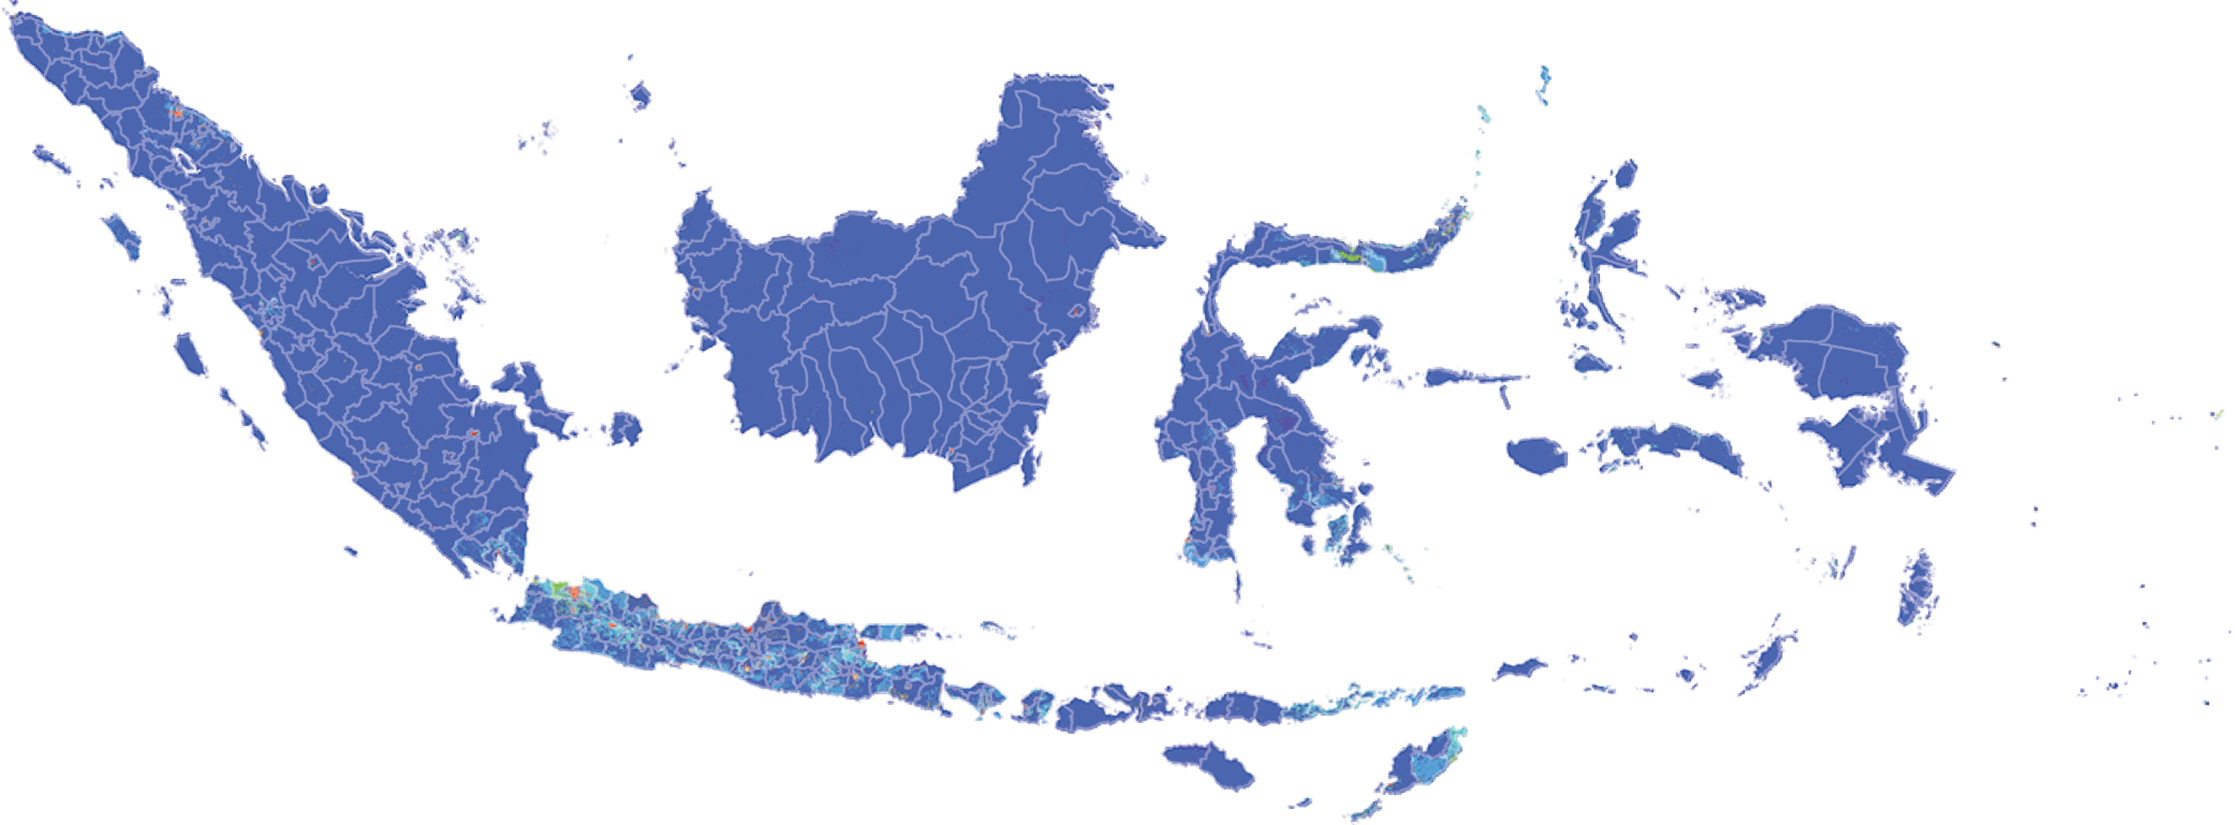 Indonesia - Number and distribution of pregnancies (2012)